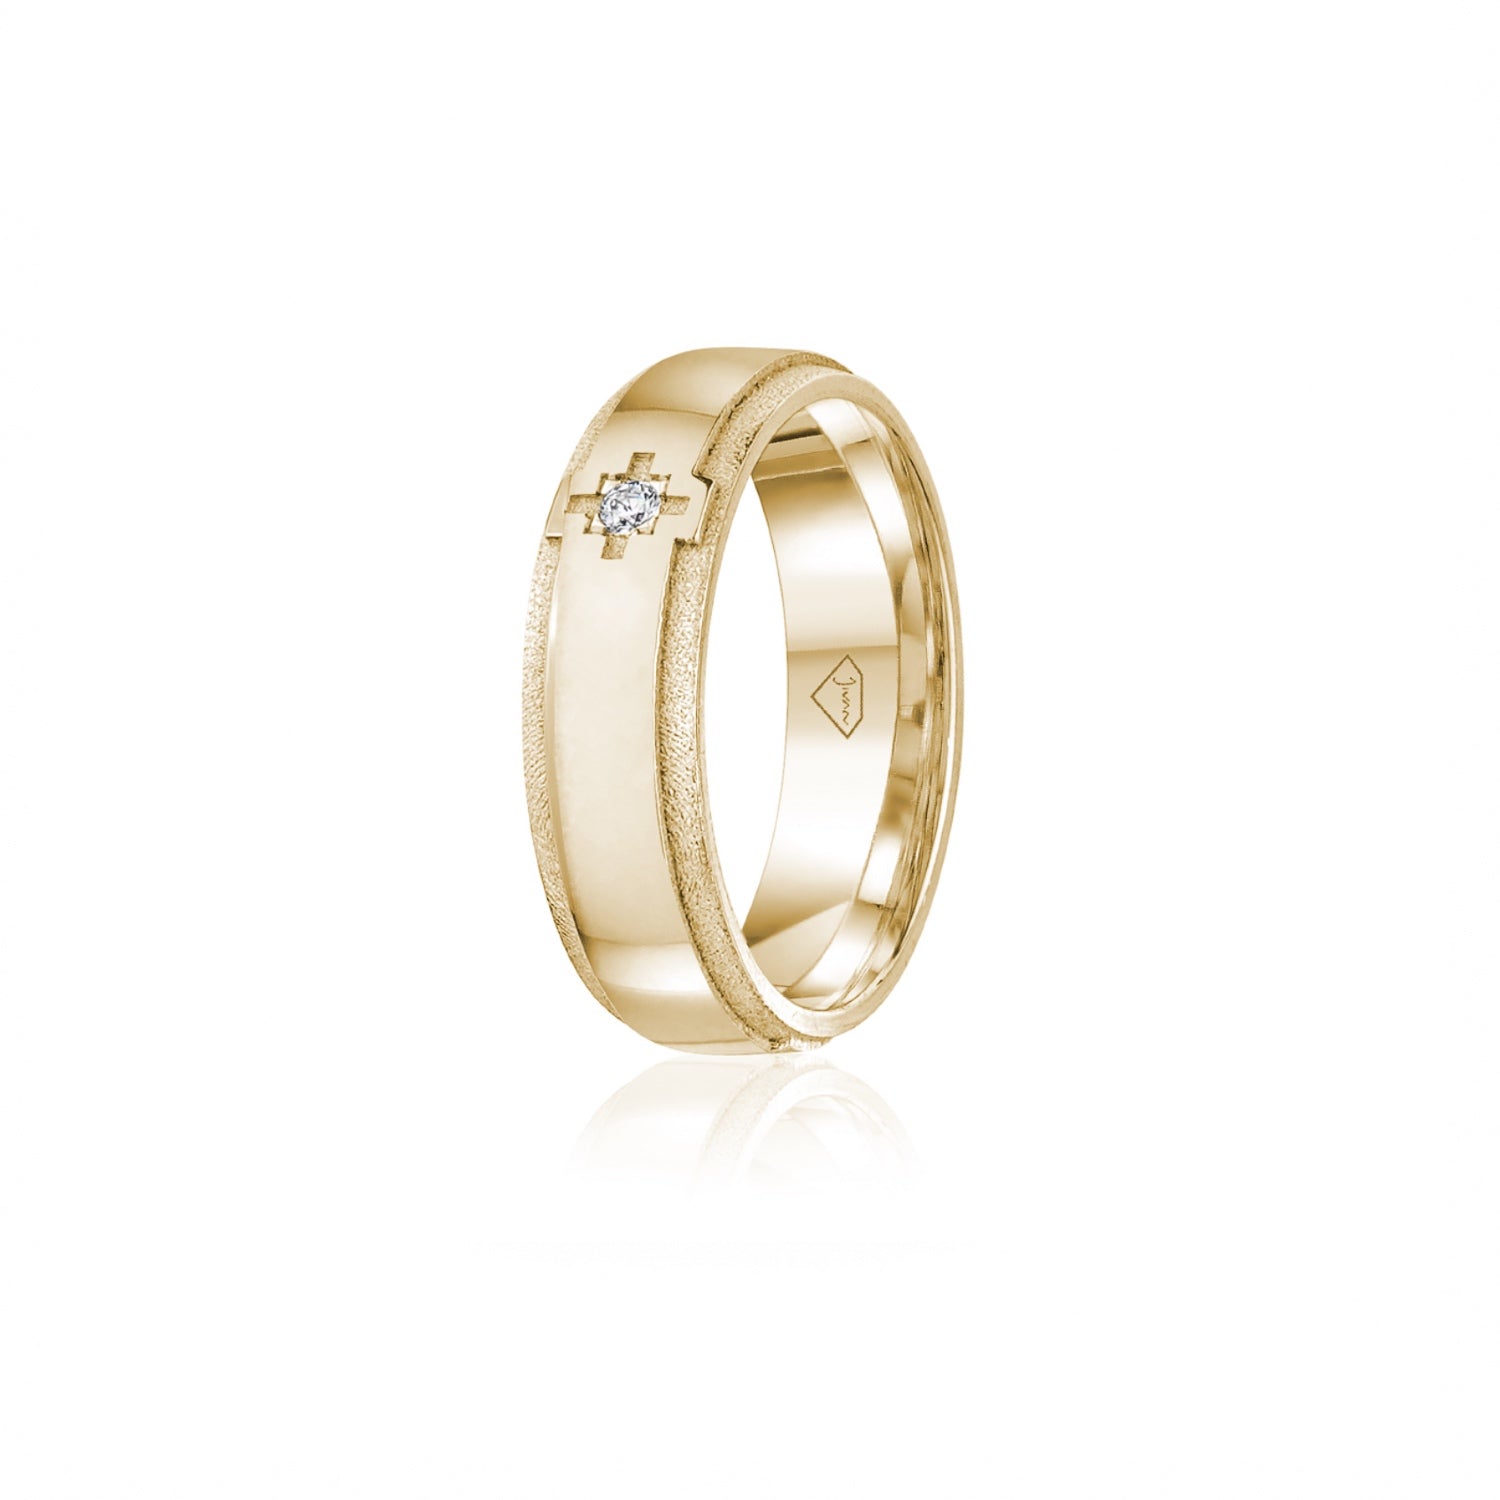 Diamond Accent Polished Finish Bevelled Edge 8-9 mm Wedding Ring in Yellow Gold